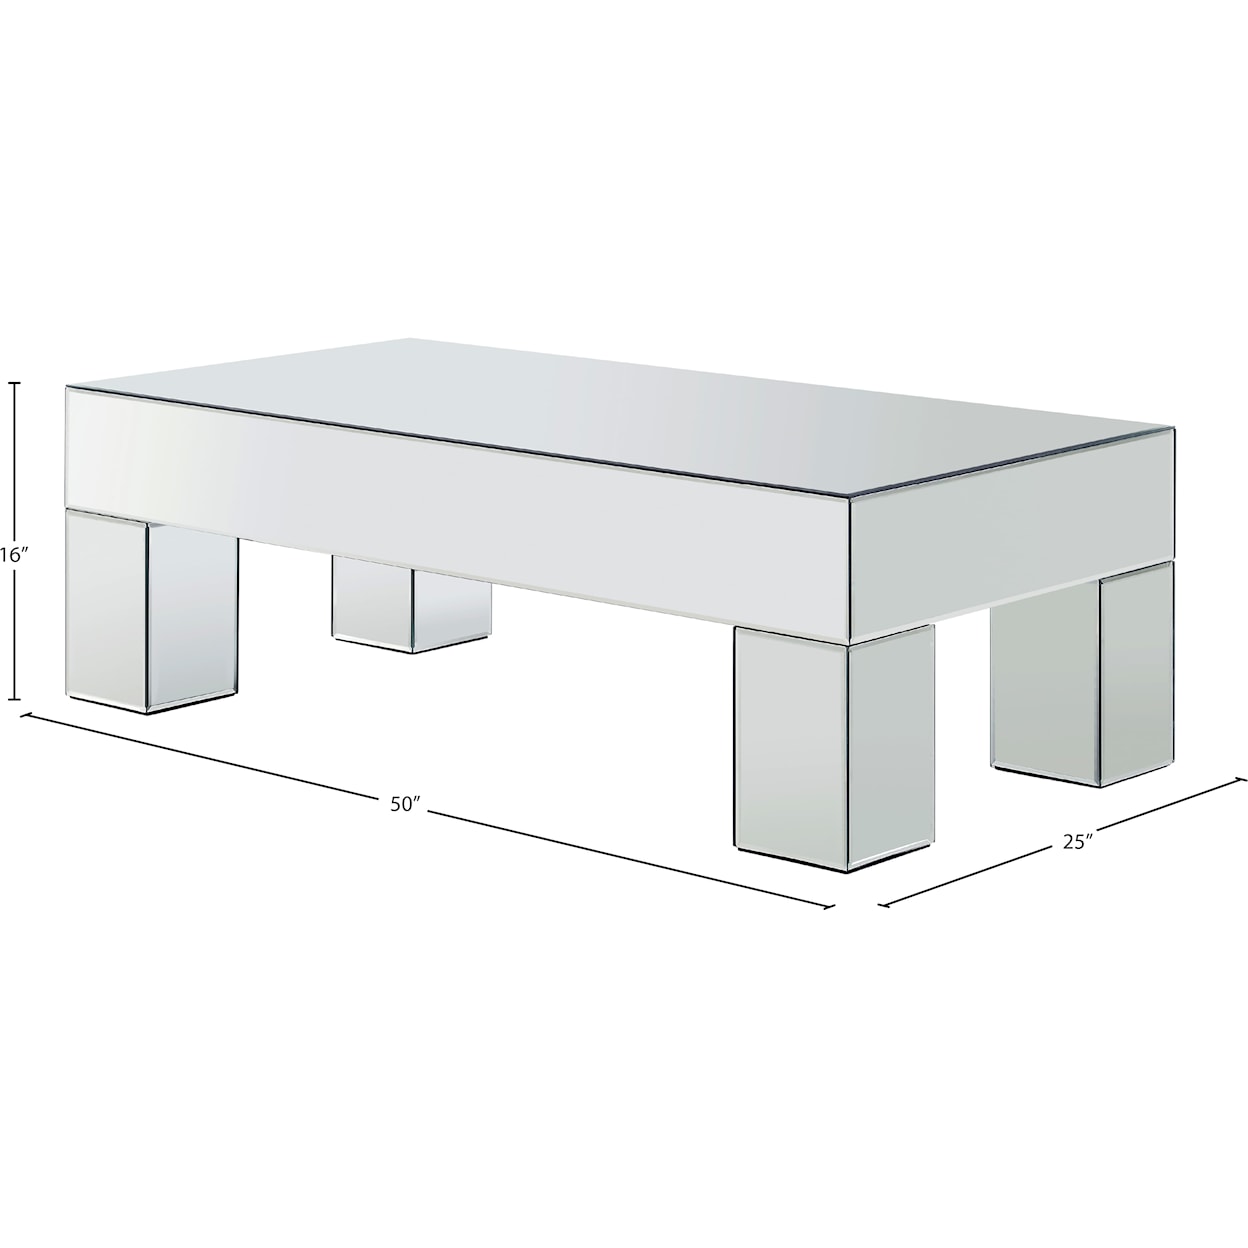 Meridian Furniture Lainy Coffee Table